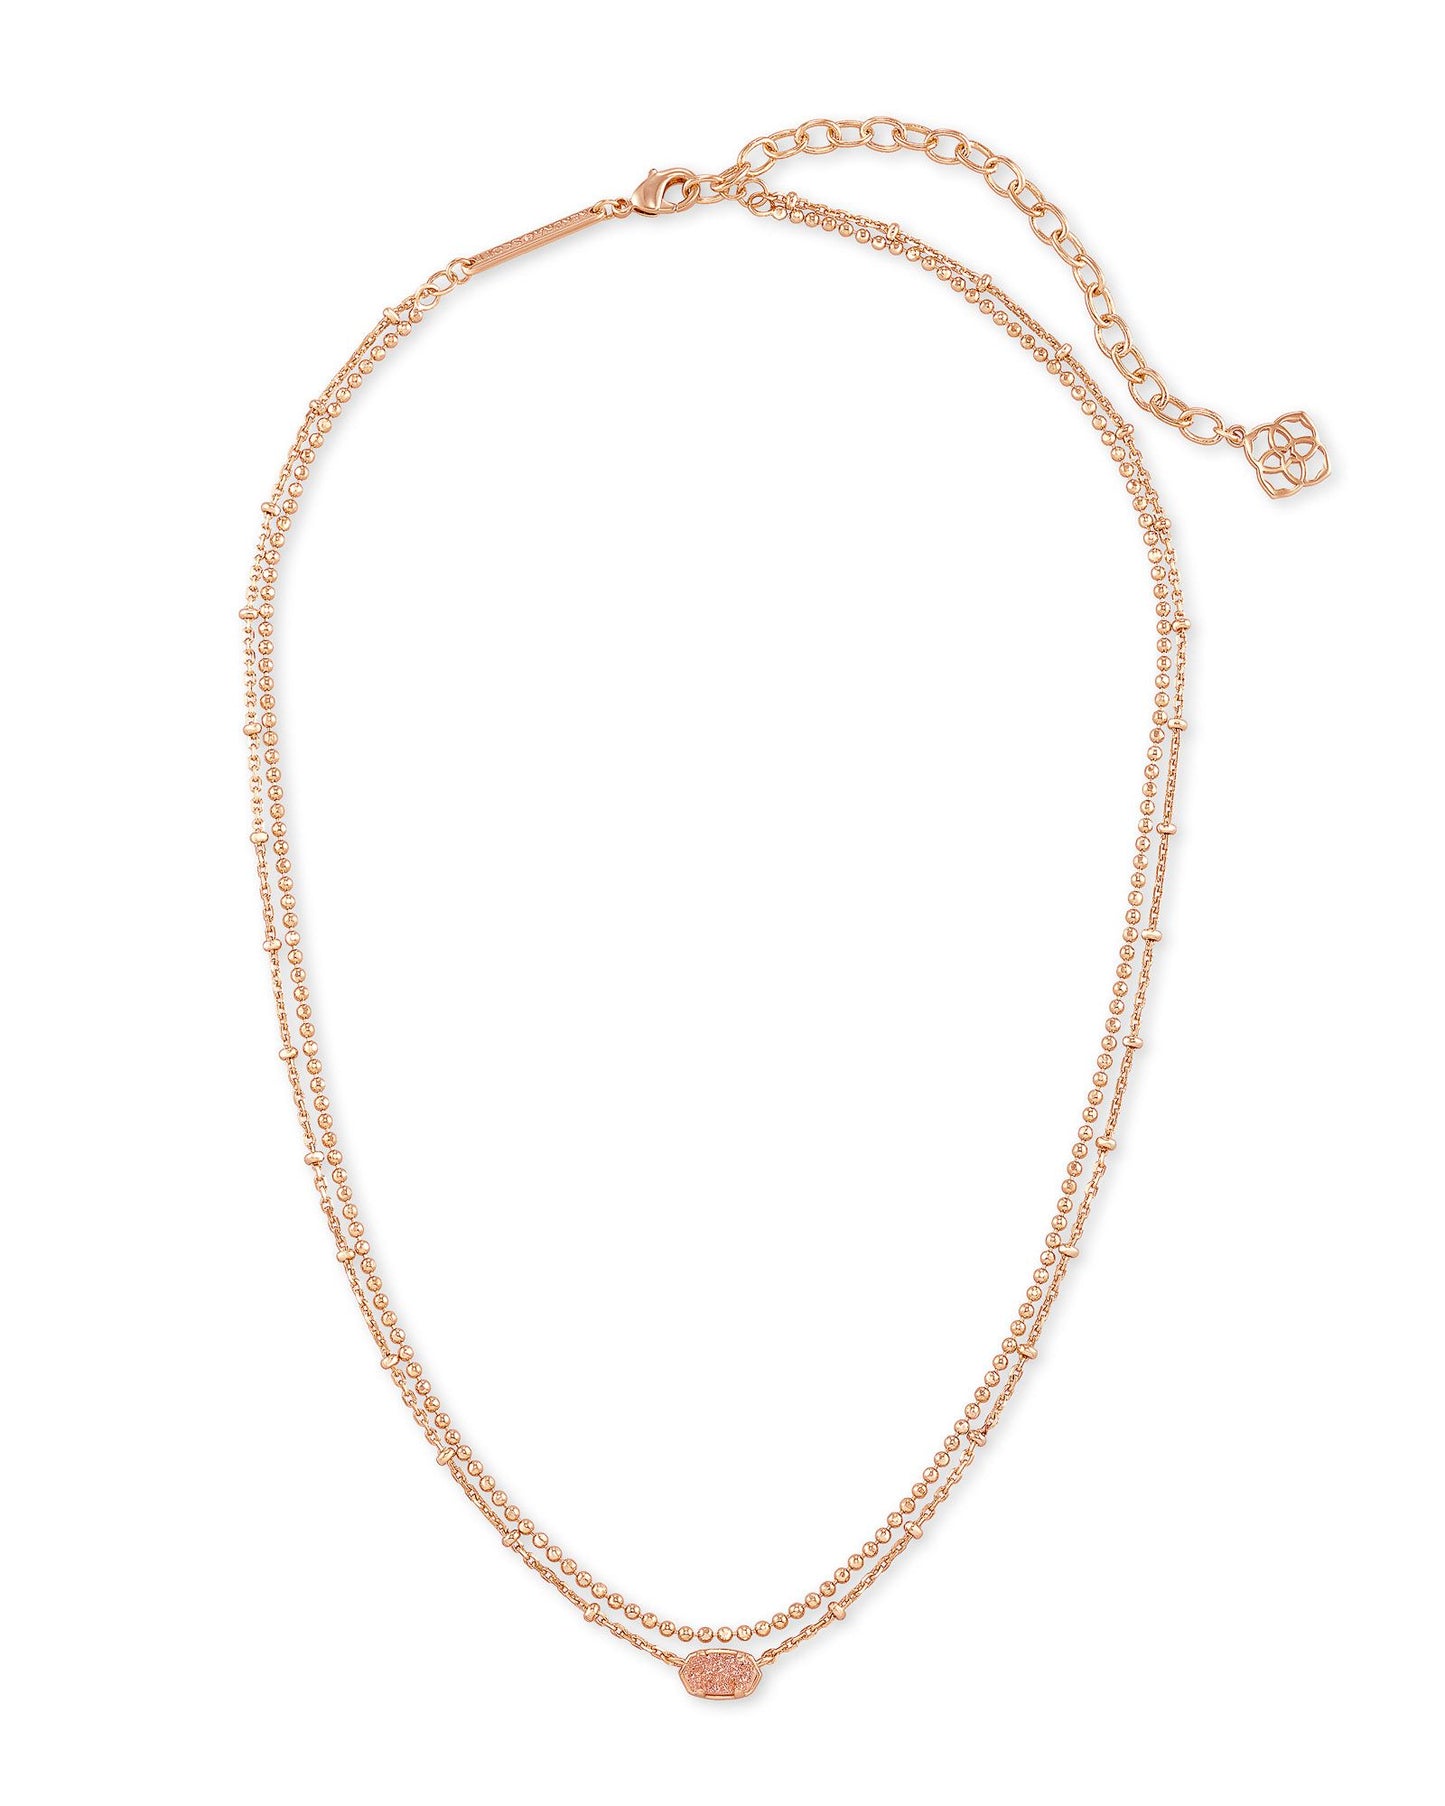 Emilie Gold Multi Strand Necklace in Sand Drusy